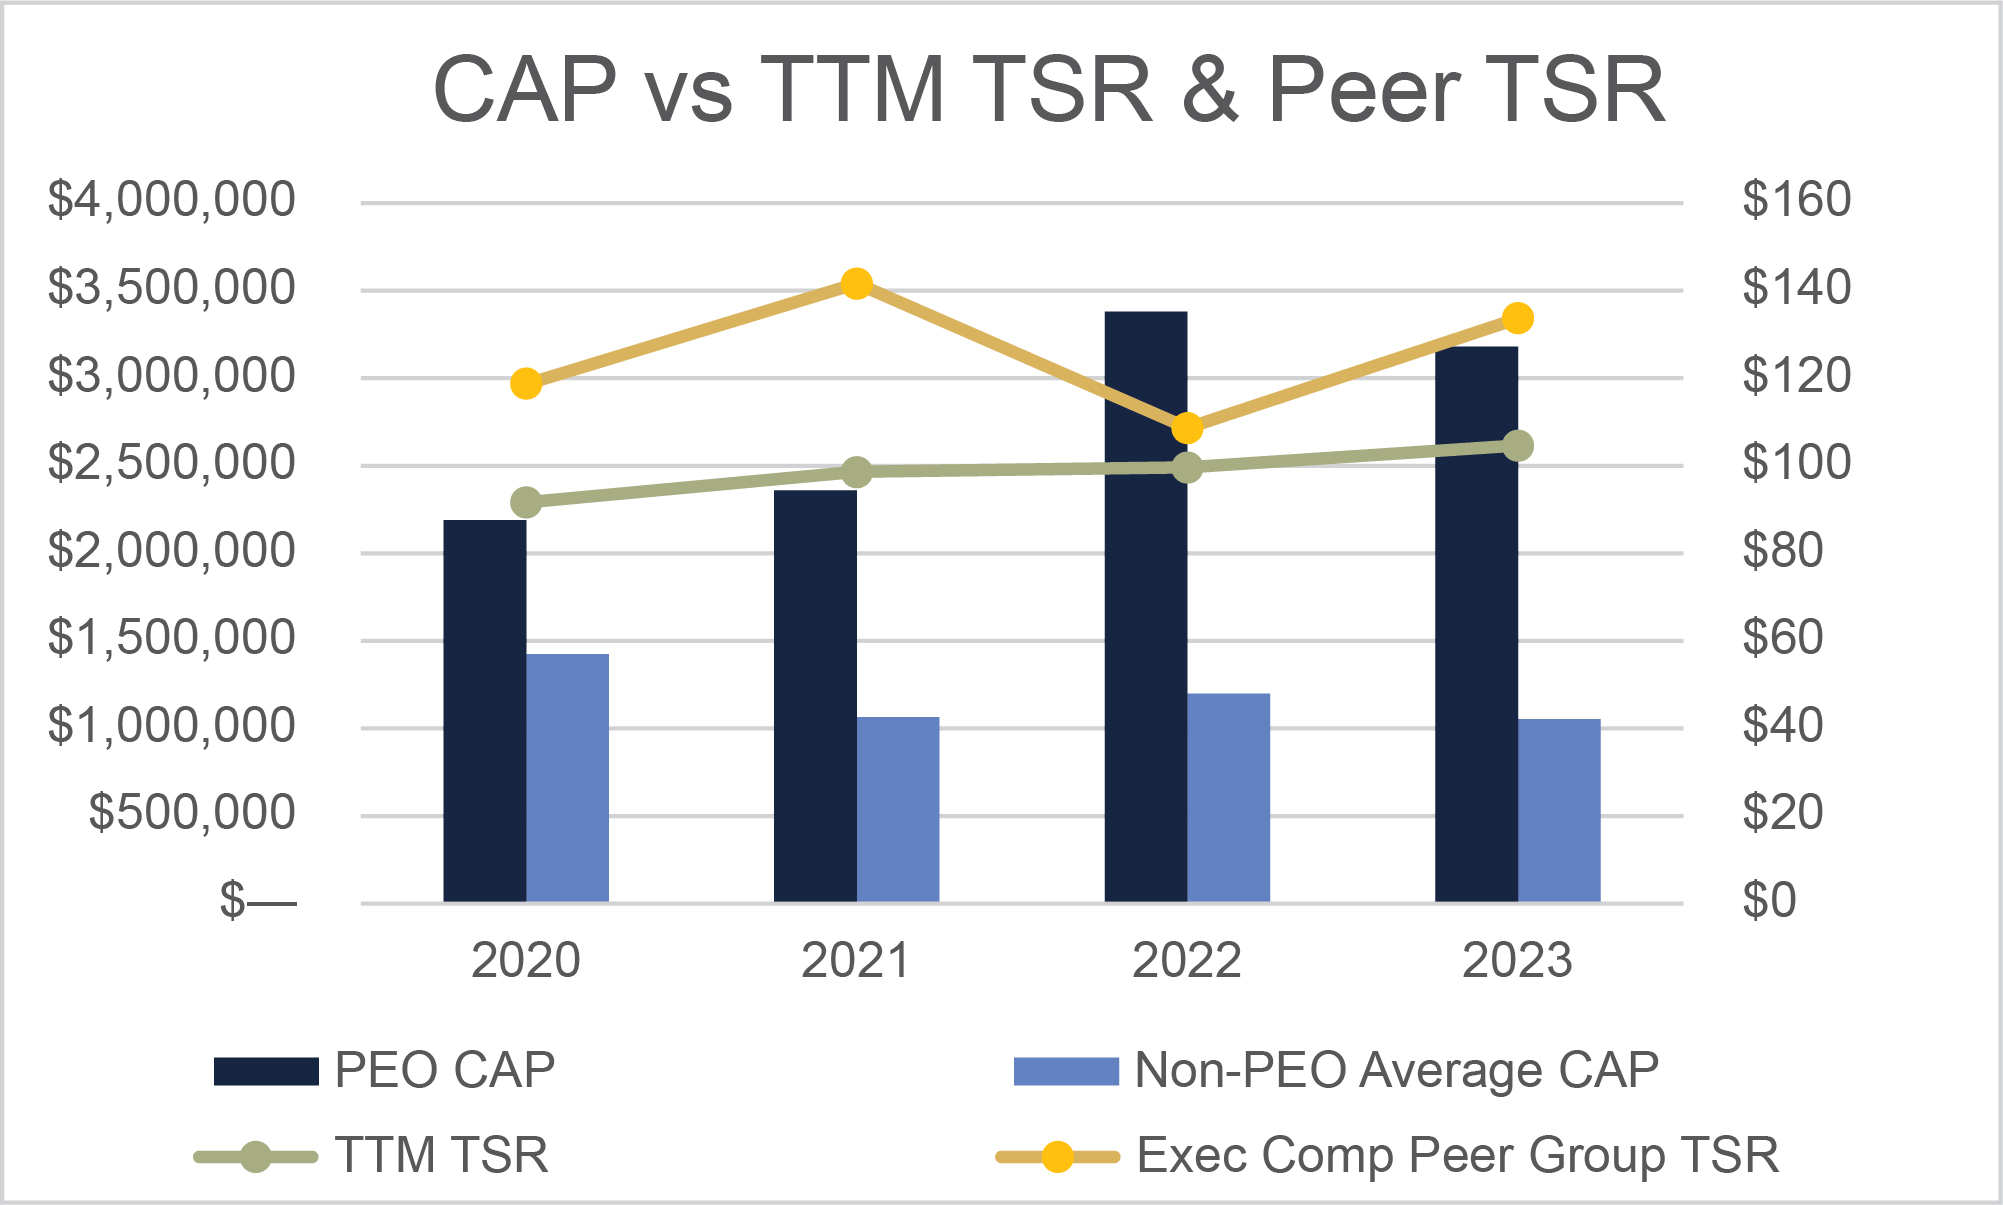 Mixed bar/line graph in millions showing PEO and non NEO CAP vs. TTM TSR and Exec Comp Peer group TSR